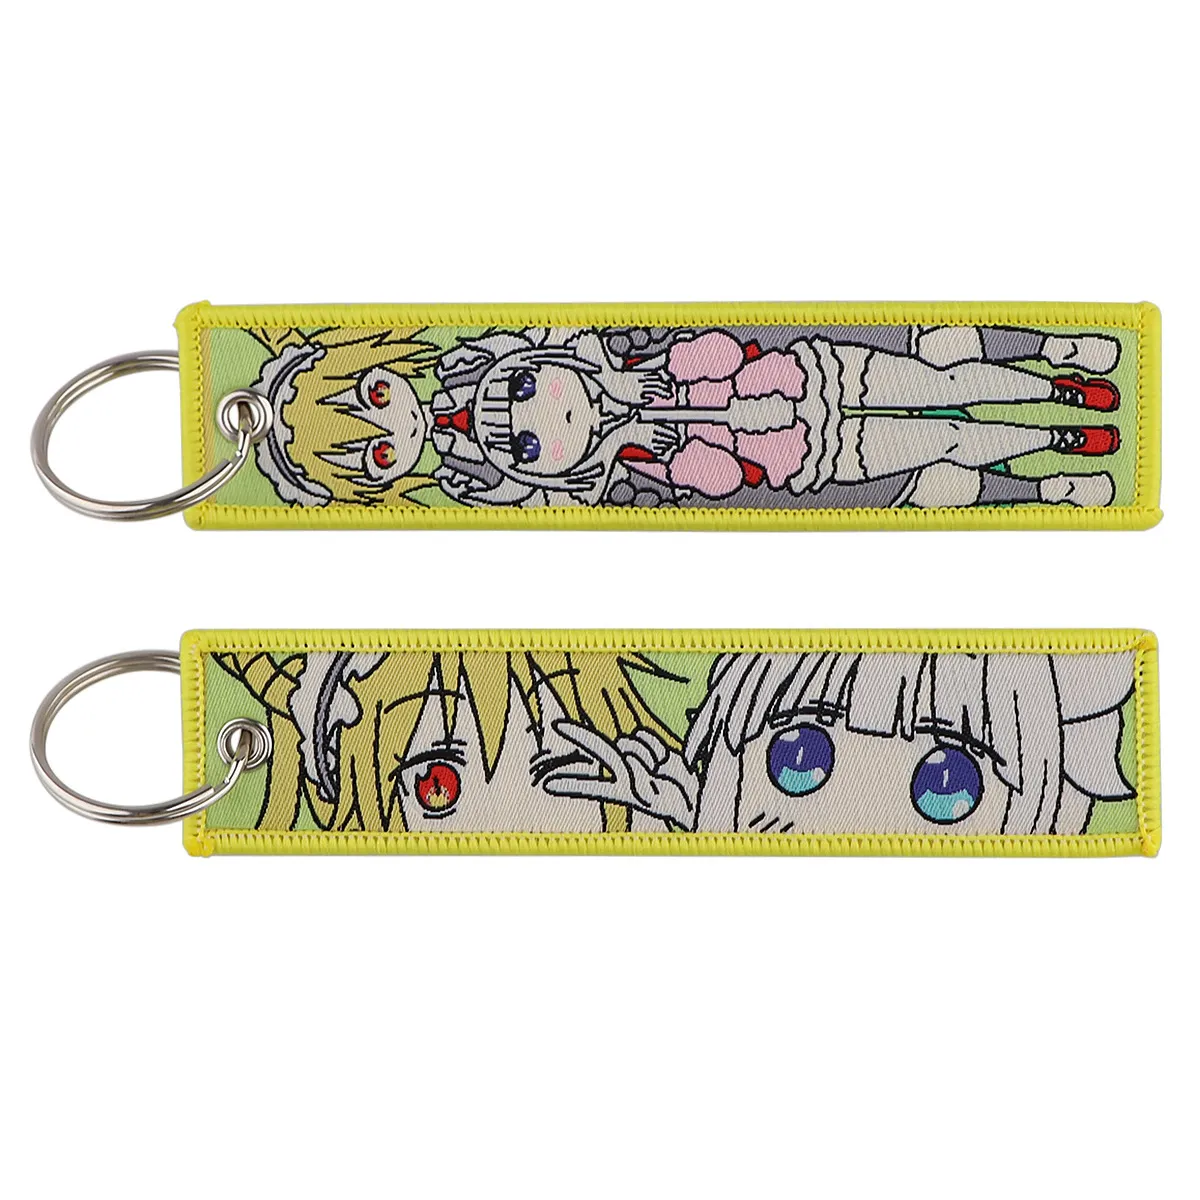 Keychains & Lanyards Various Types Of Cartoon Cool Key Tag Embroidery Fobs For Motorcycles Cars Bag Backpack Keychain Fashion Ring Gi Otmxx